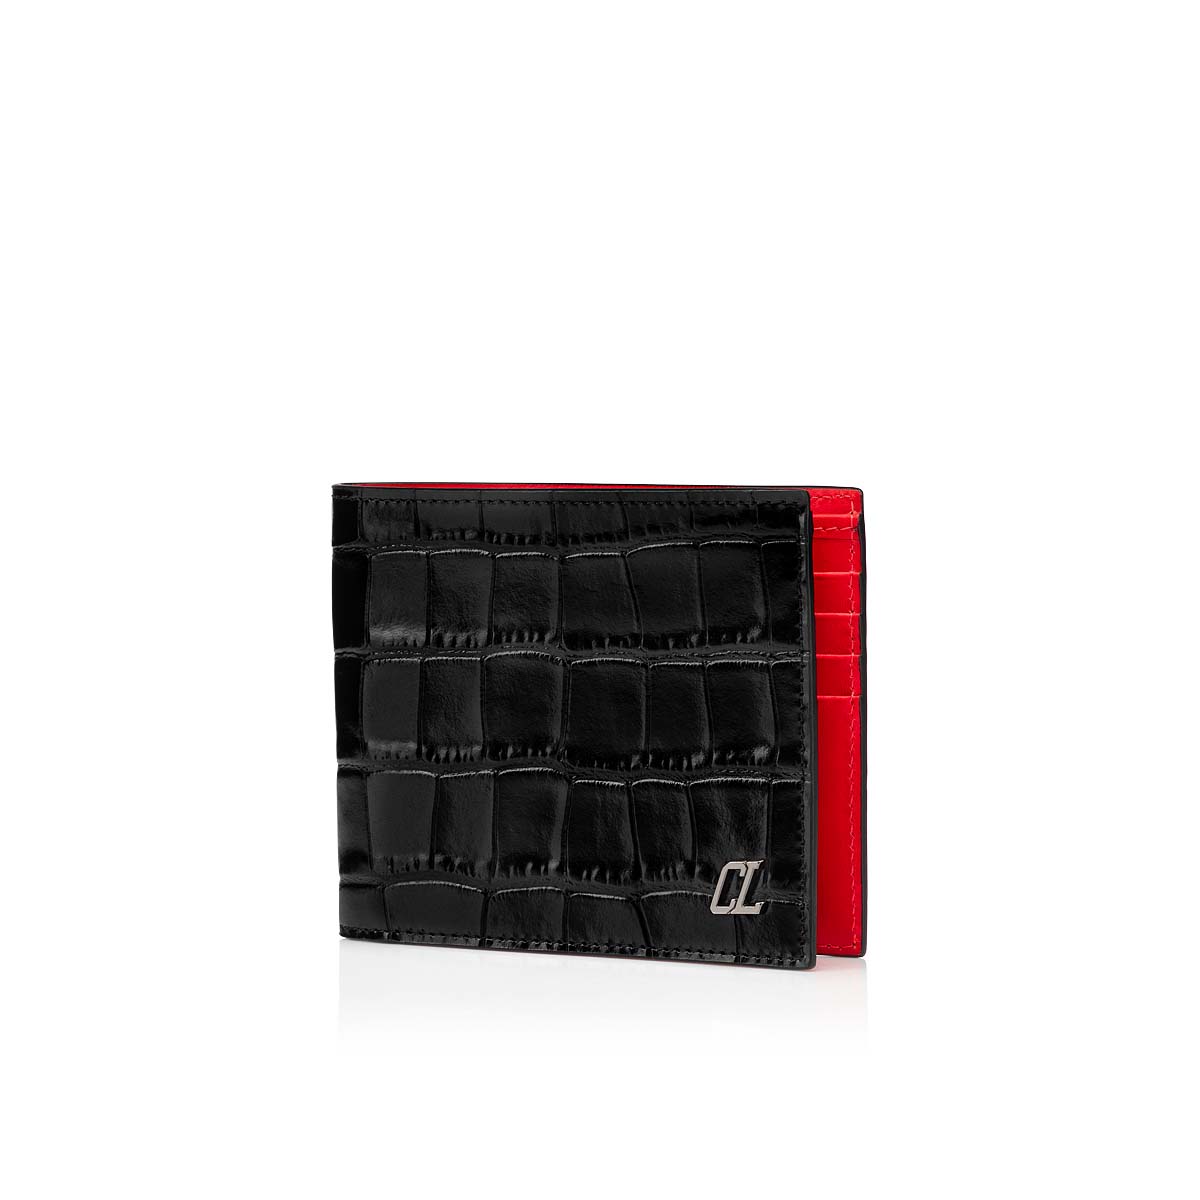 Coolcard - Wallet - Embossed calf leather - Black - Christian Louboutin